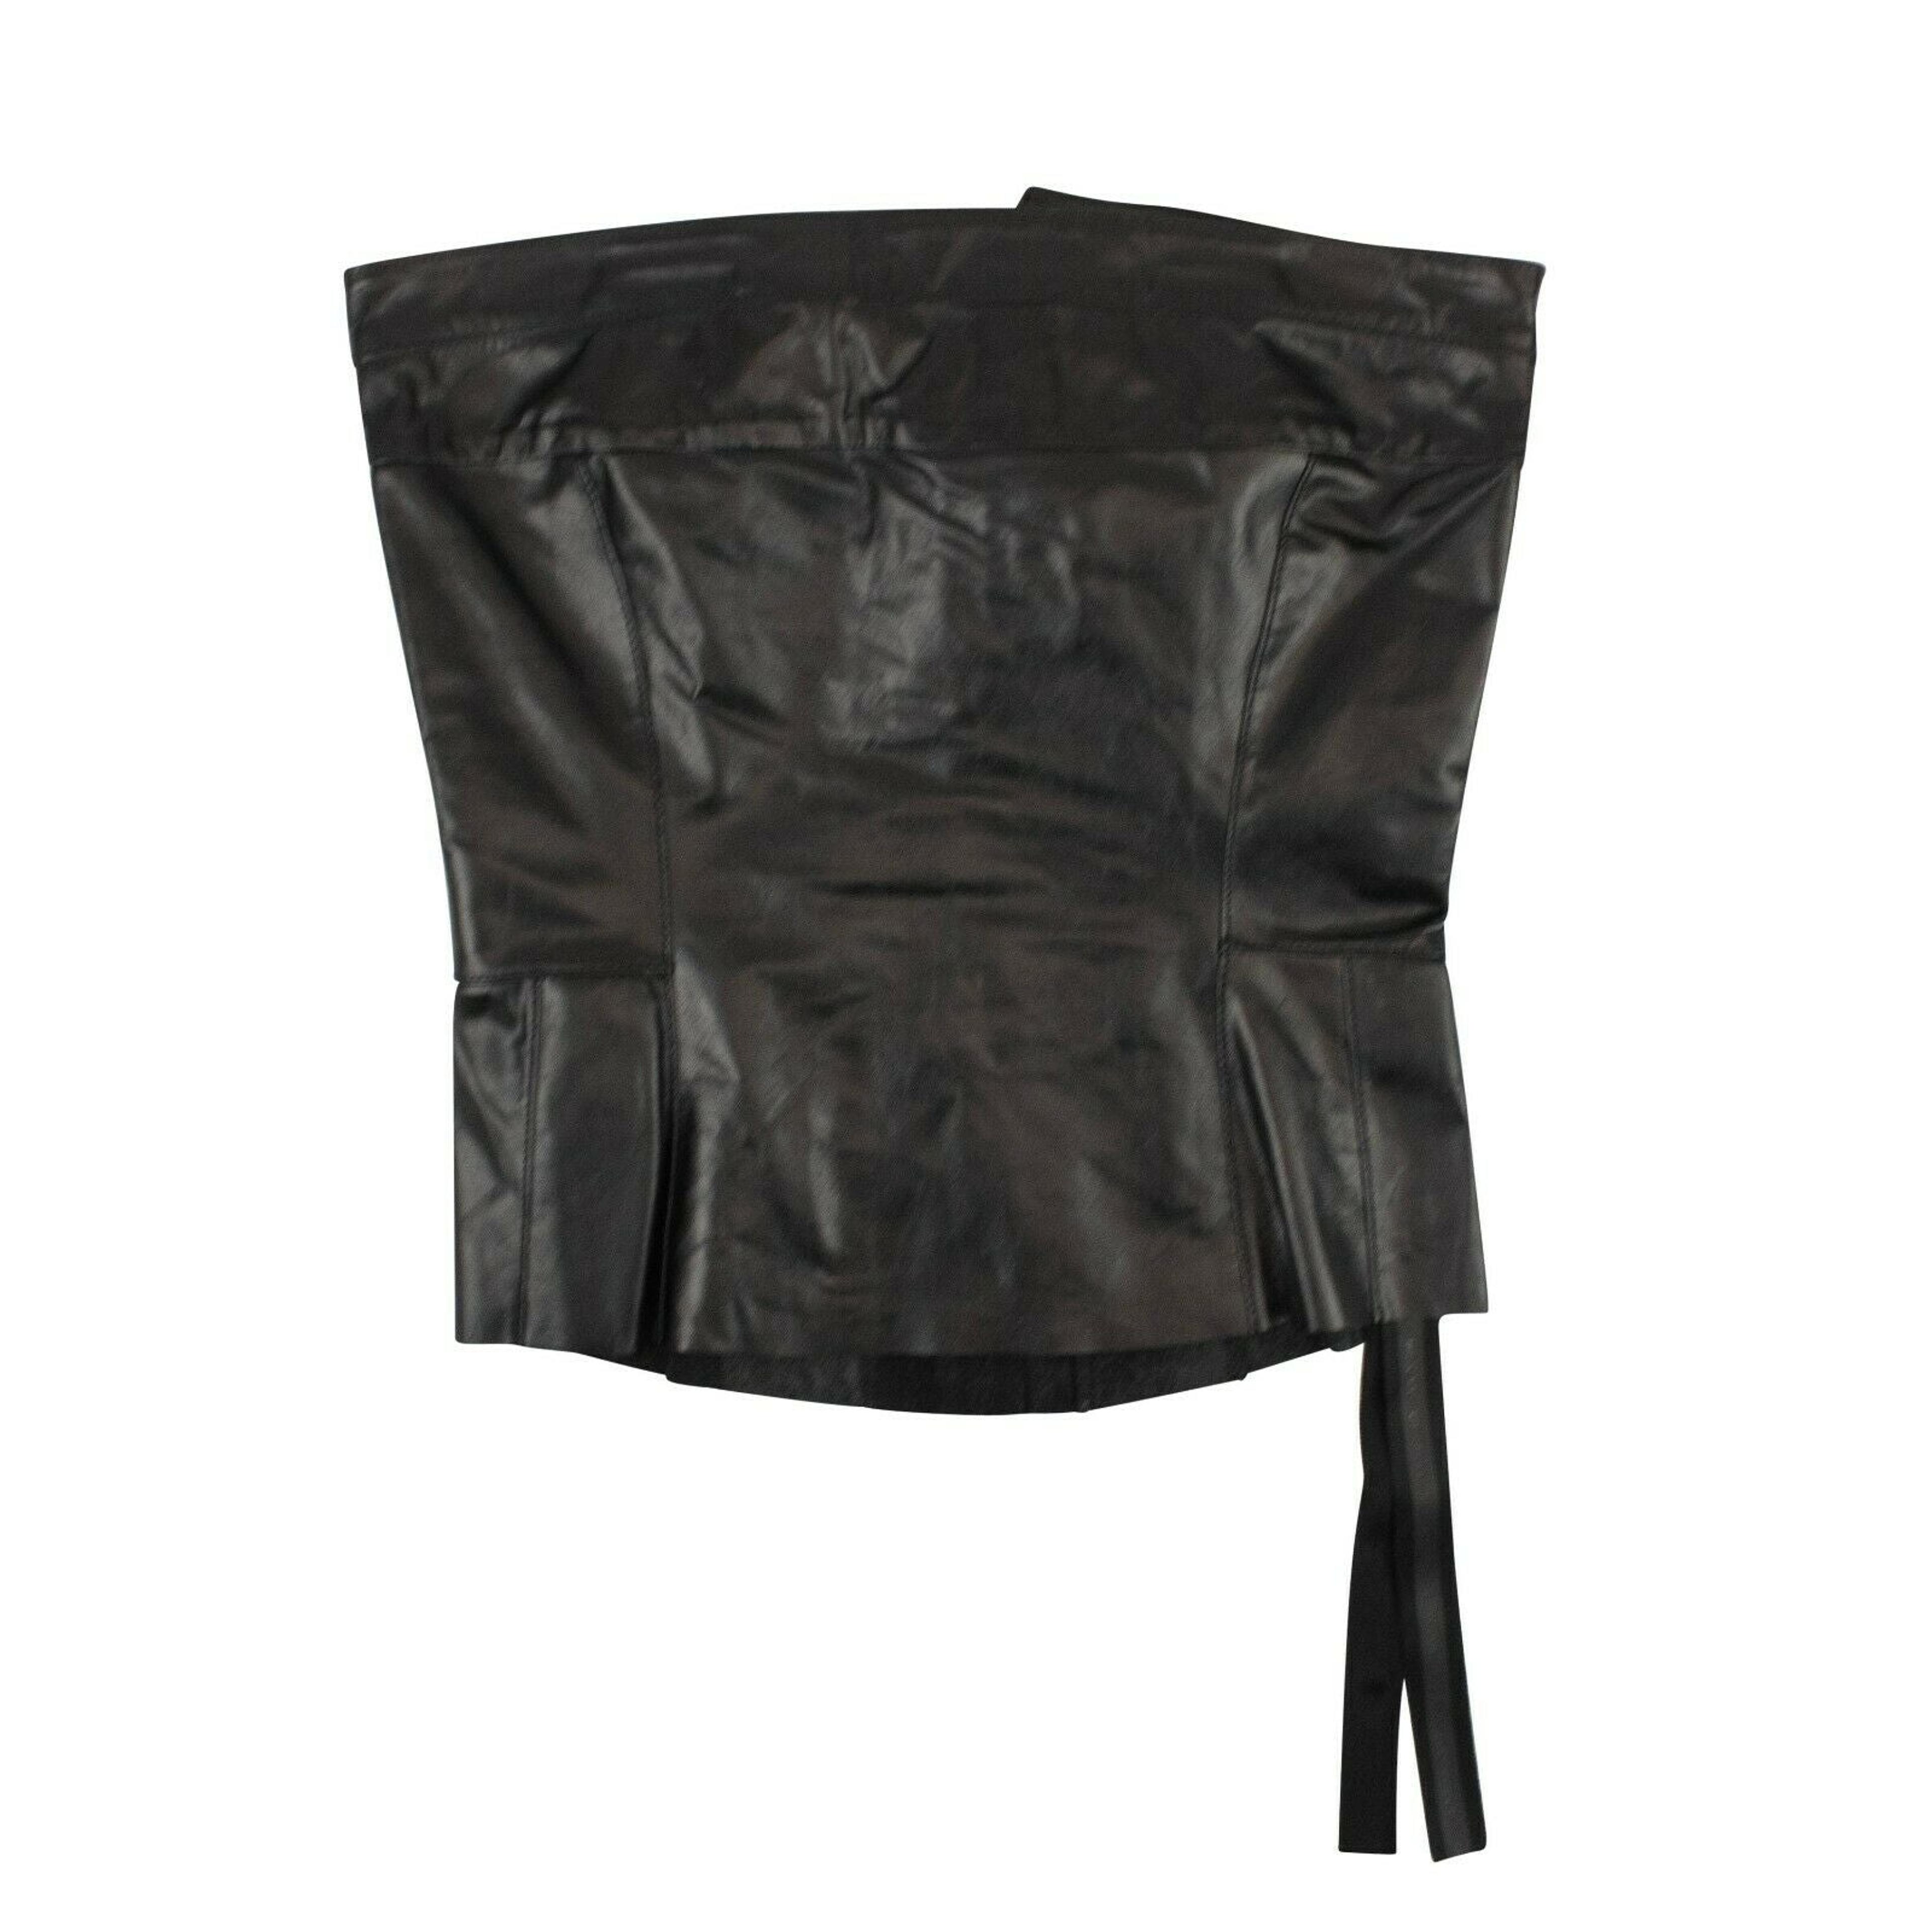 Alternate View 1 of Women's Black Leather Corset Top